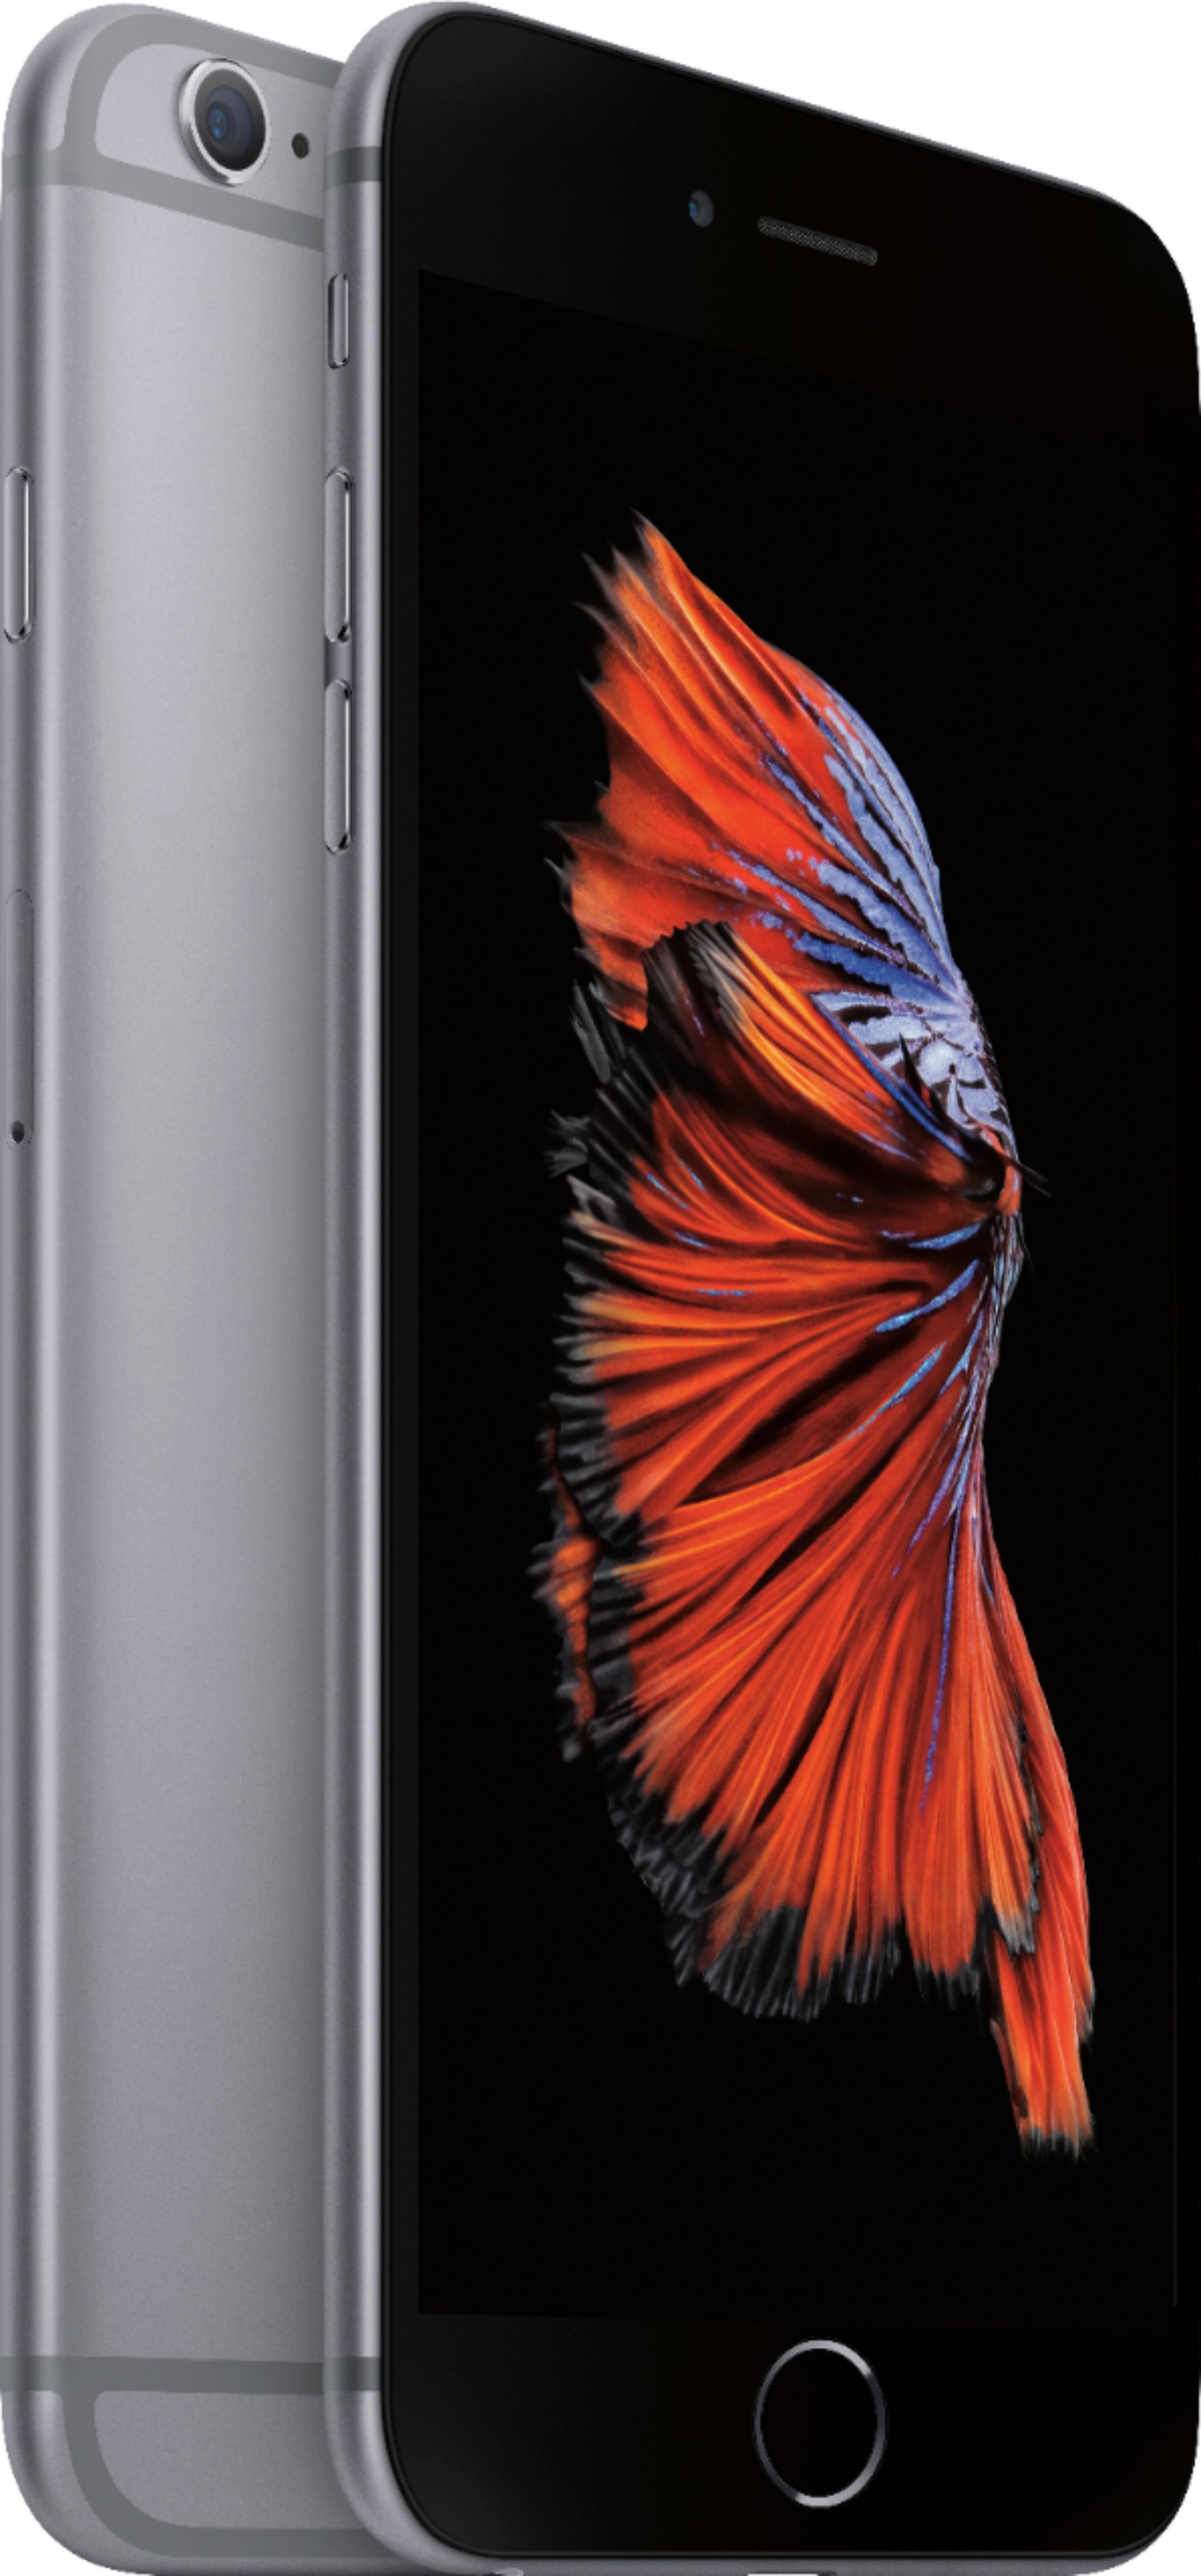 iPhone 6s Space Gray 128 GB